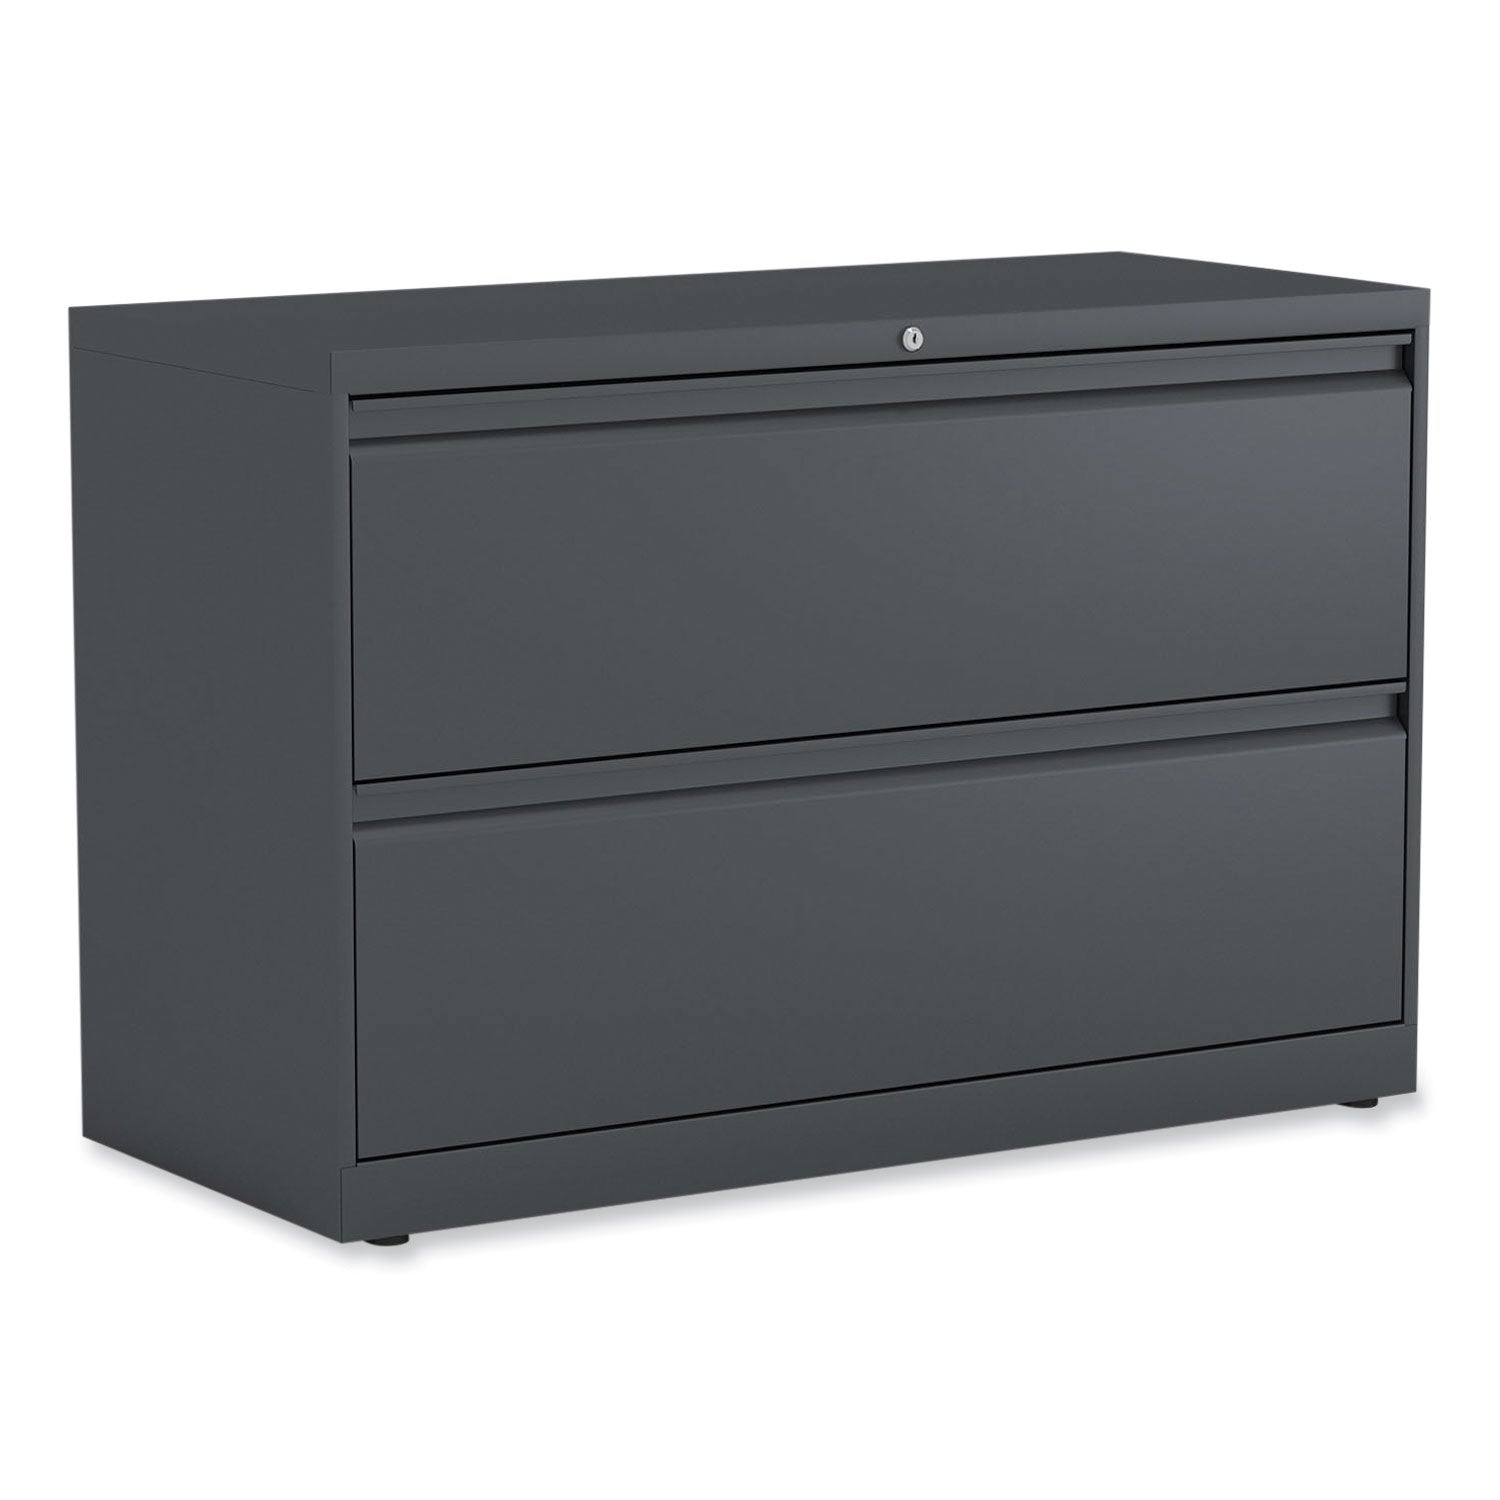 lateral-file-2-legal-letter-size-file-drawers-charcoal-42-x-1863-x-28_alehlf4229cc - 1